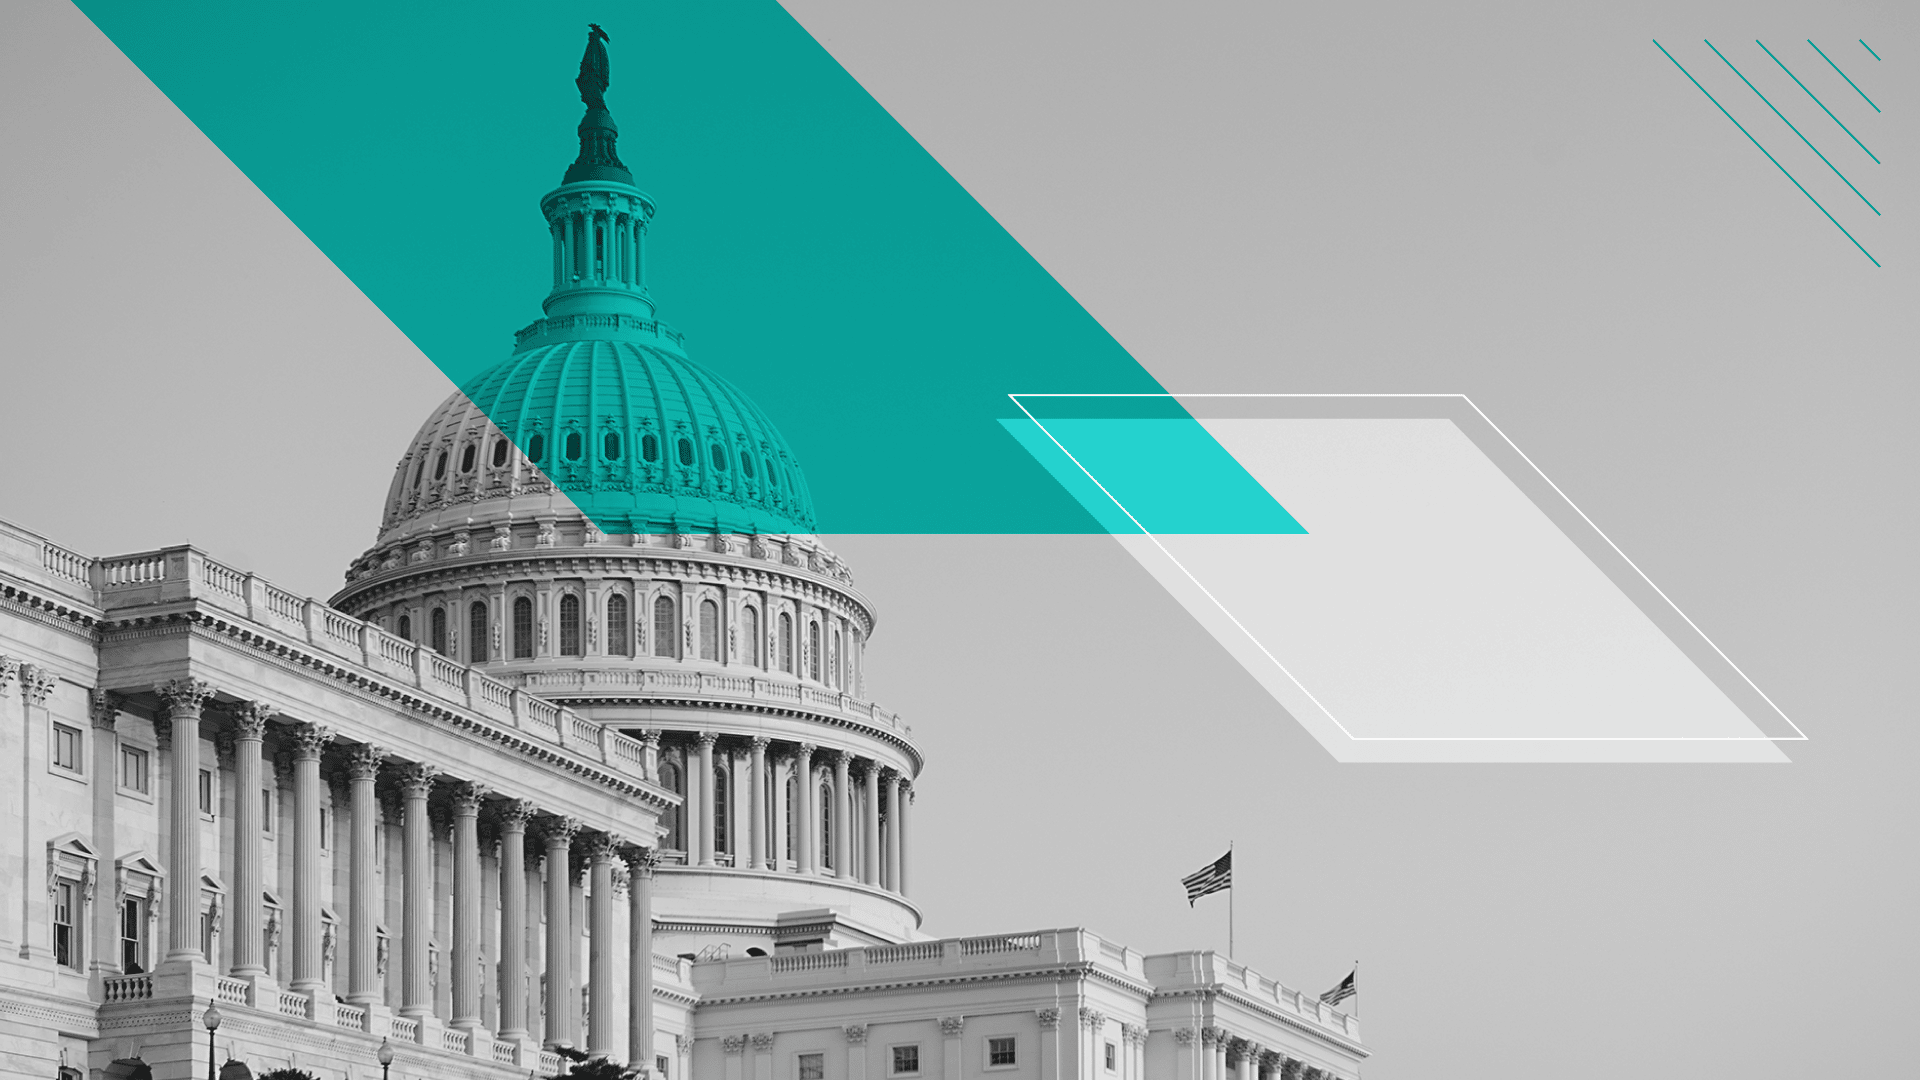 Image of the Capitol building in grey scale with a turquoise semi-transparent overlay towards the left and a white semi-transparent overlay to the bottom right of it, overlapping slightly.